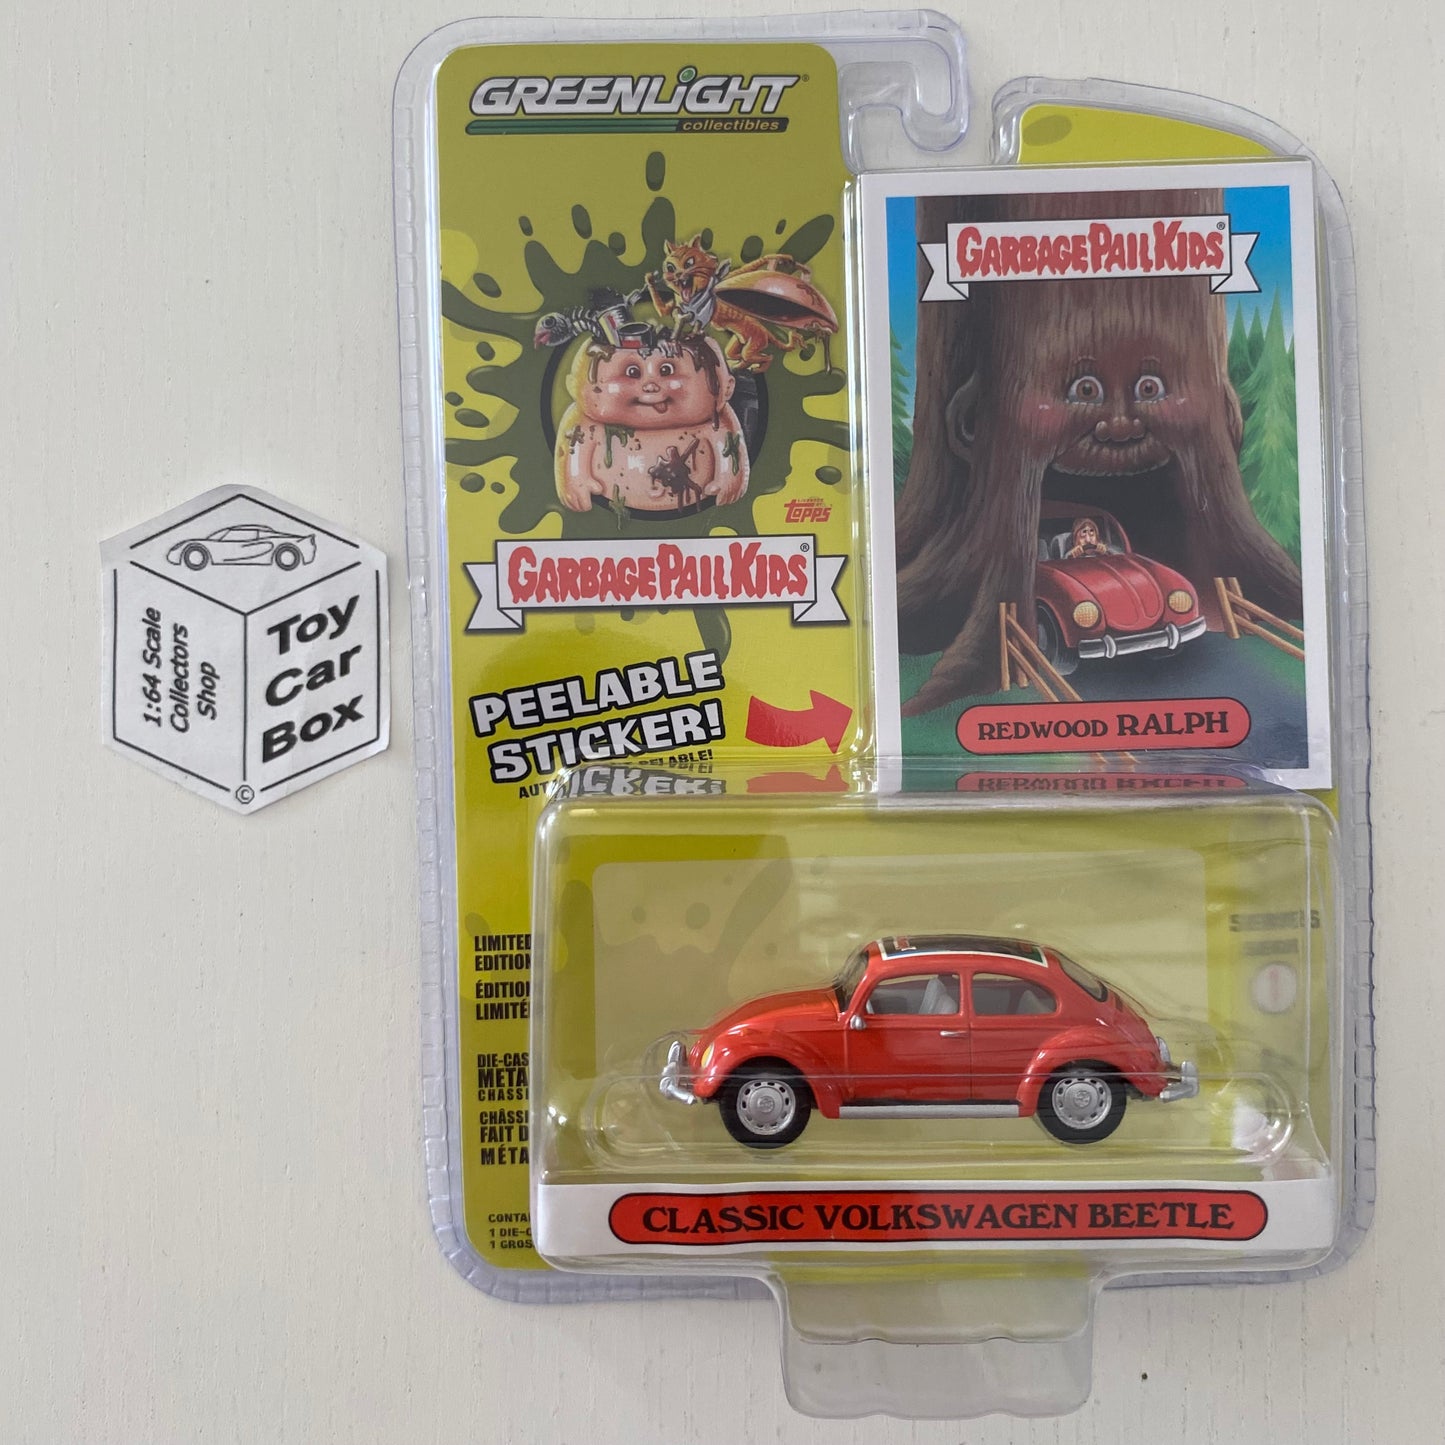 GREENLIGHT - Classic VW Volkswagen Beetle (Red - Garbage Pail Kids Series 1) E91